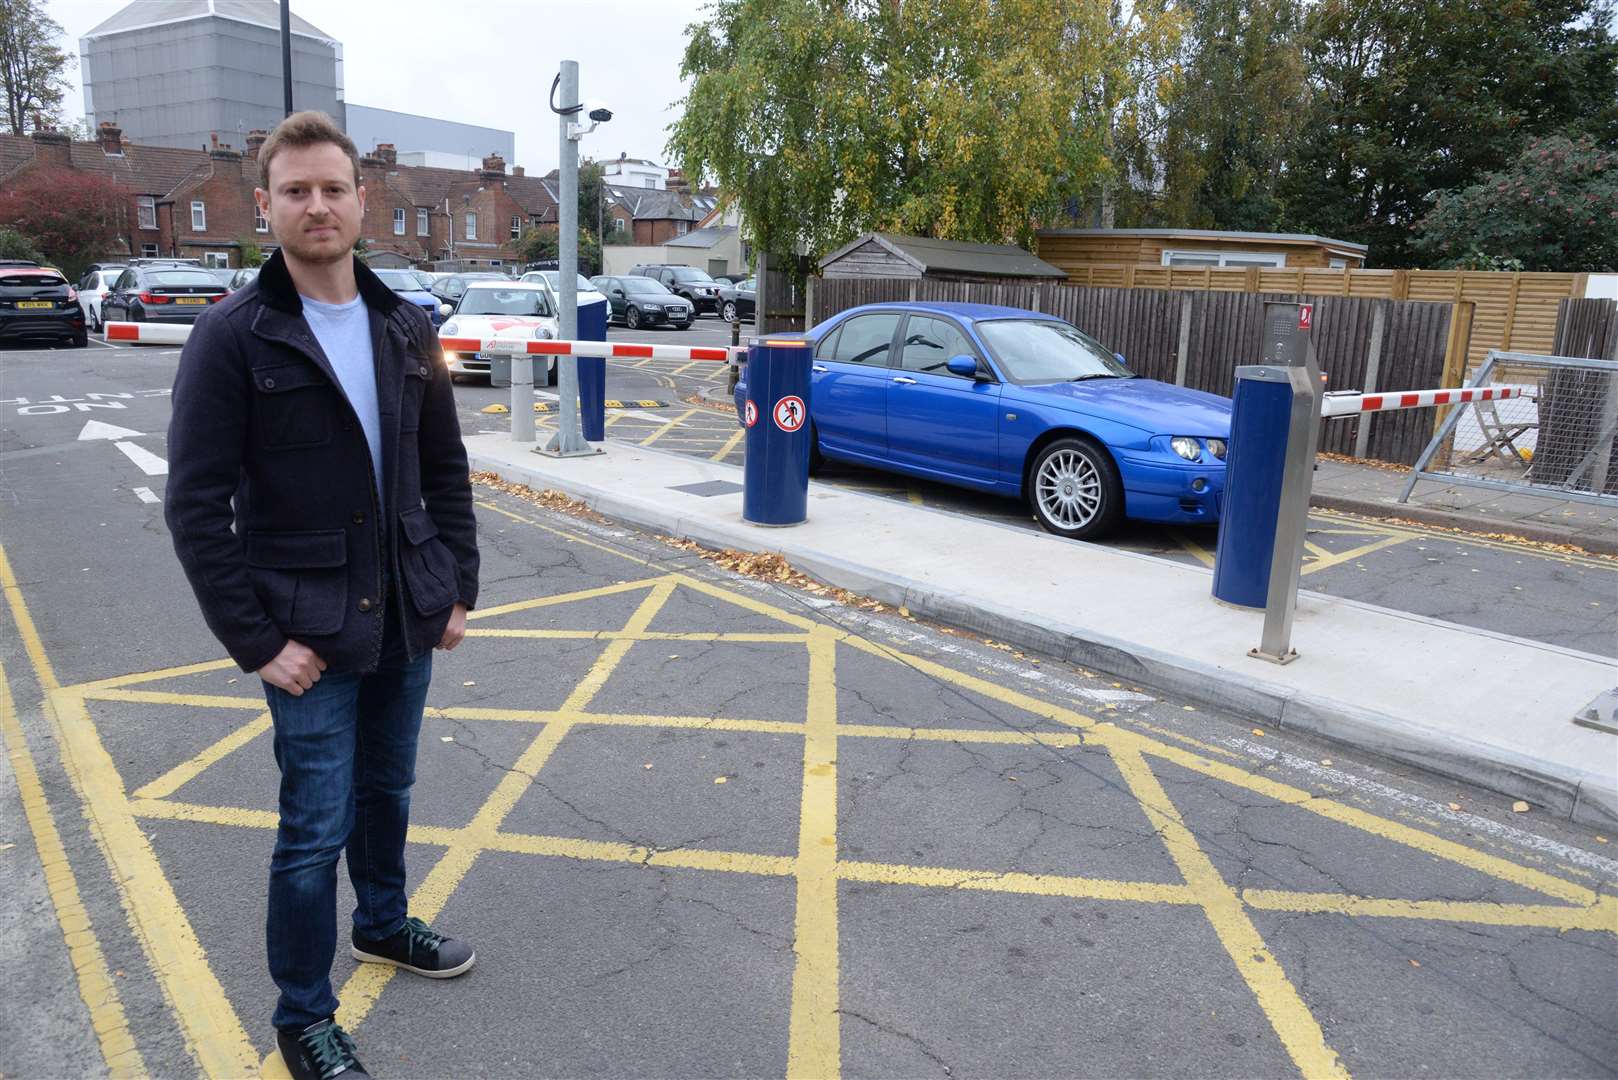 Cllr Ben-Fitter Harding and the ANPR barriers at the Pound Lane car park